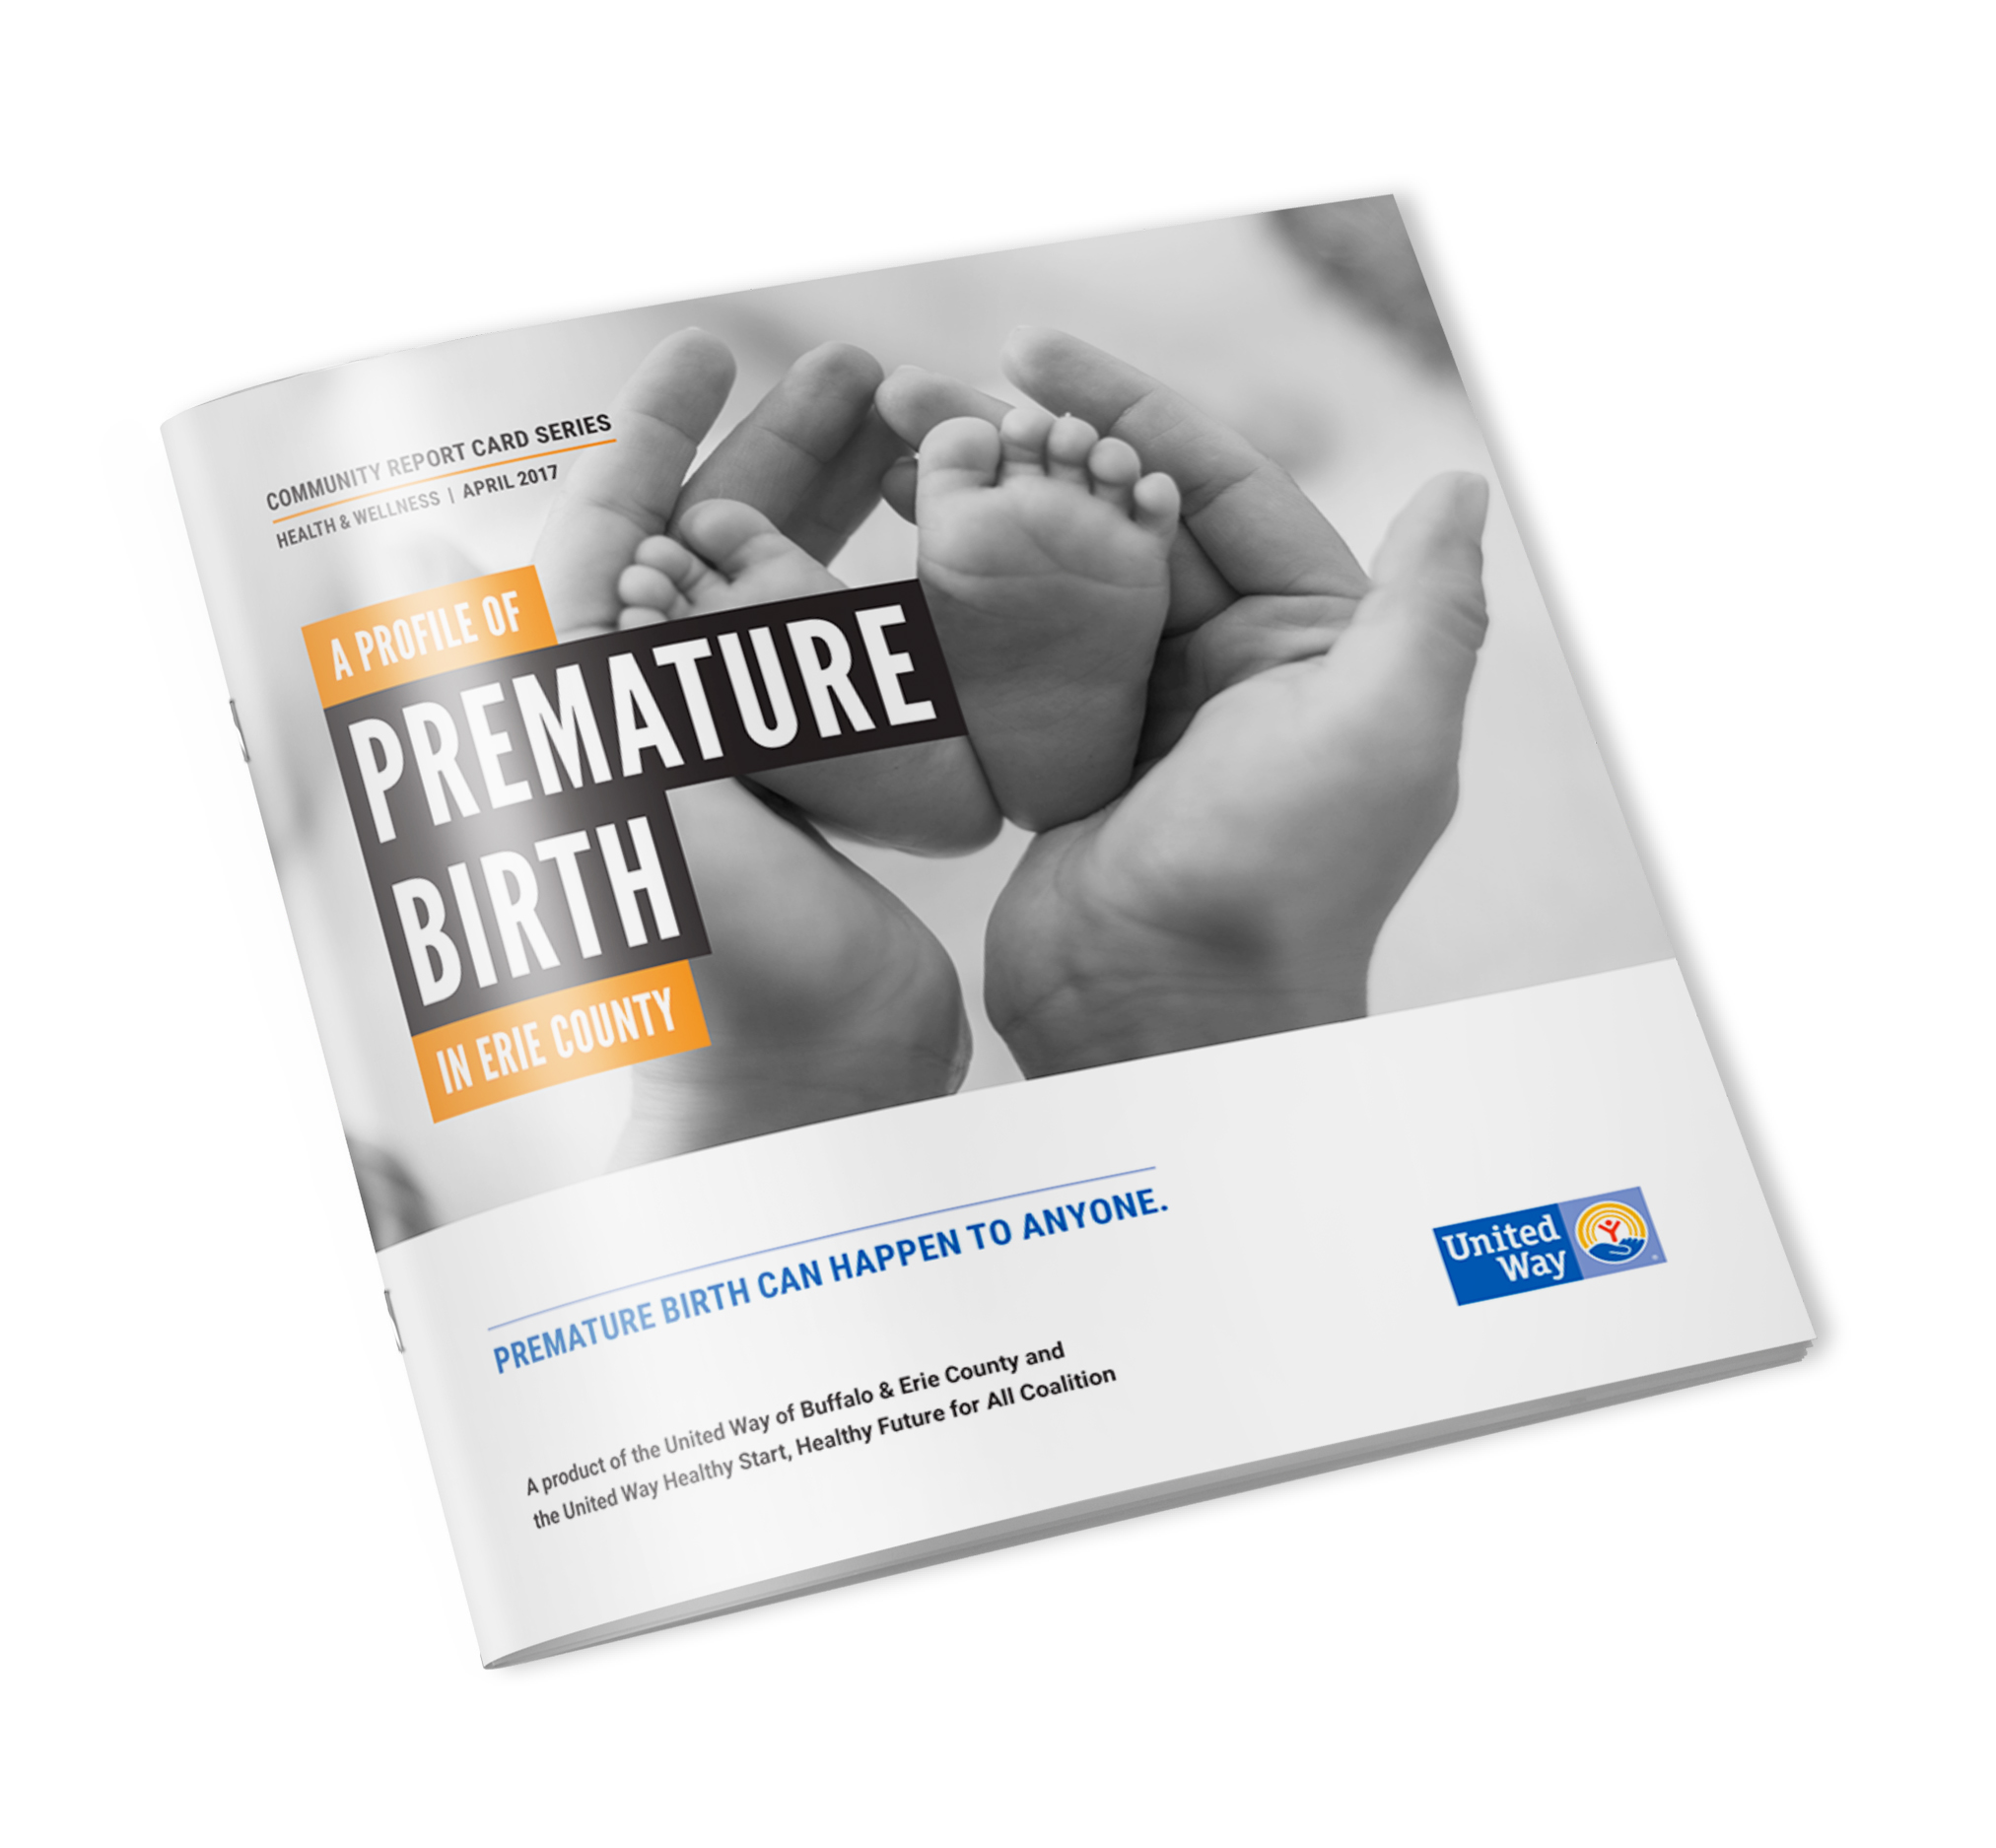 This is a picture of United Way premature birth magazine.